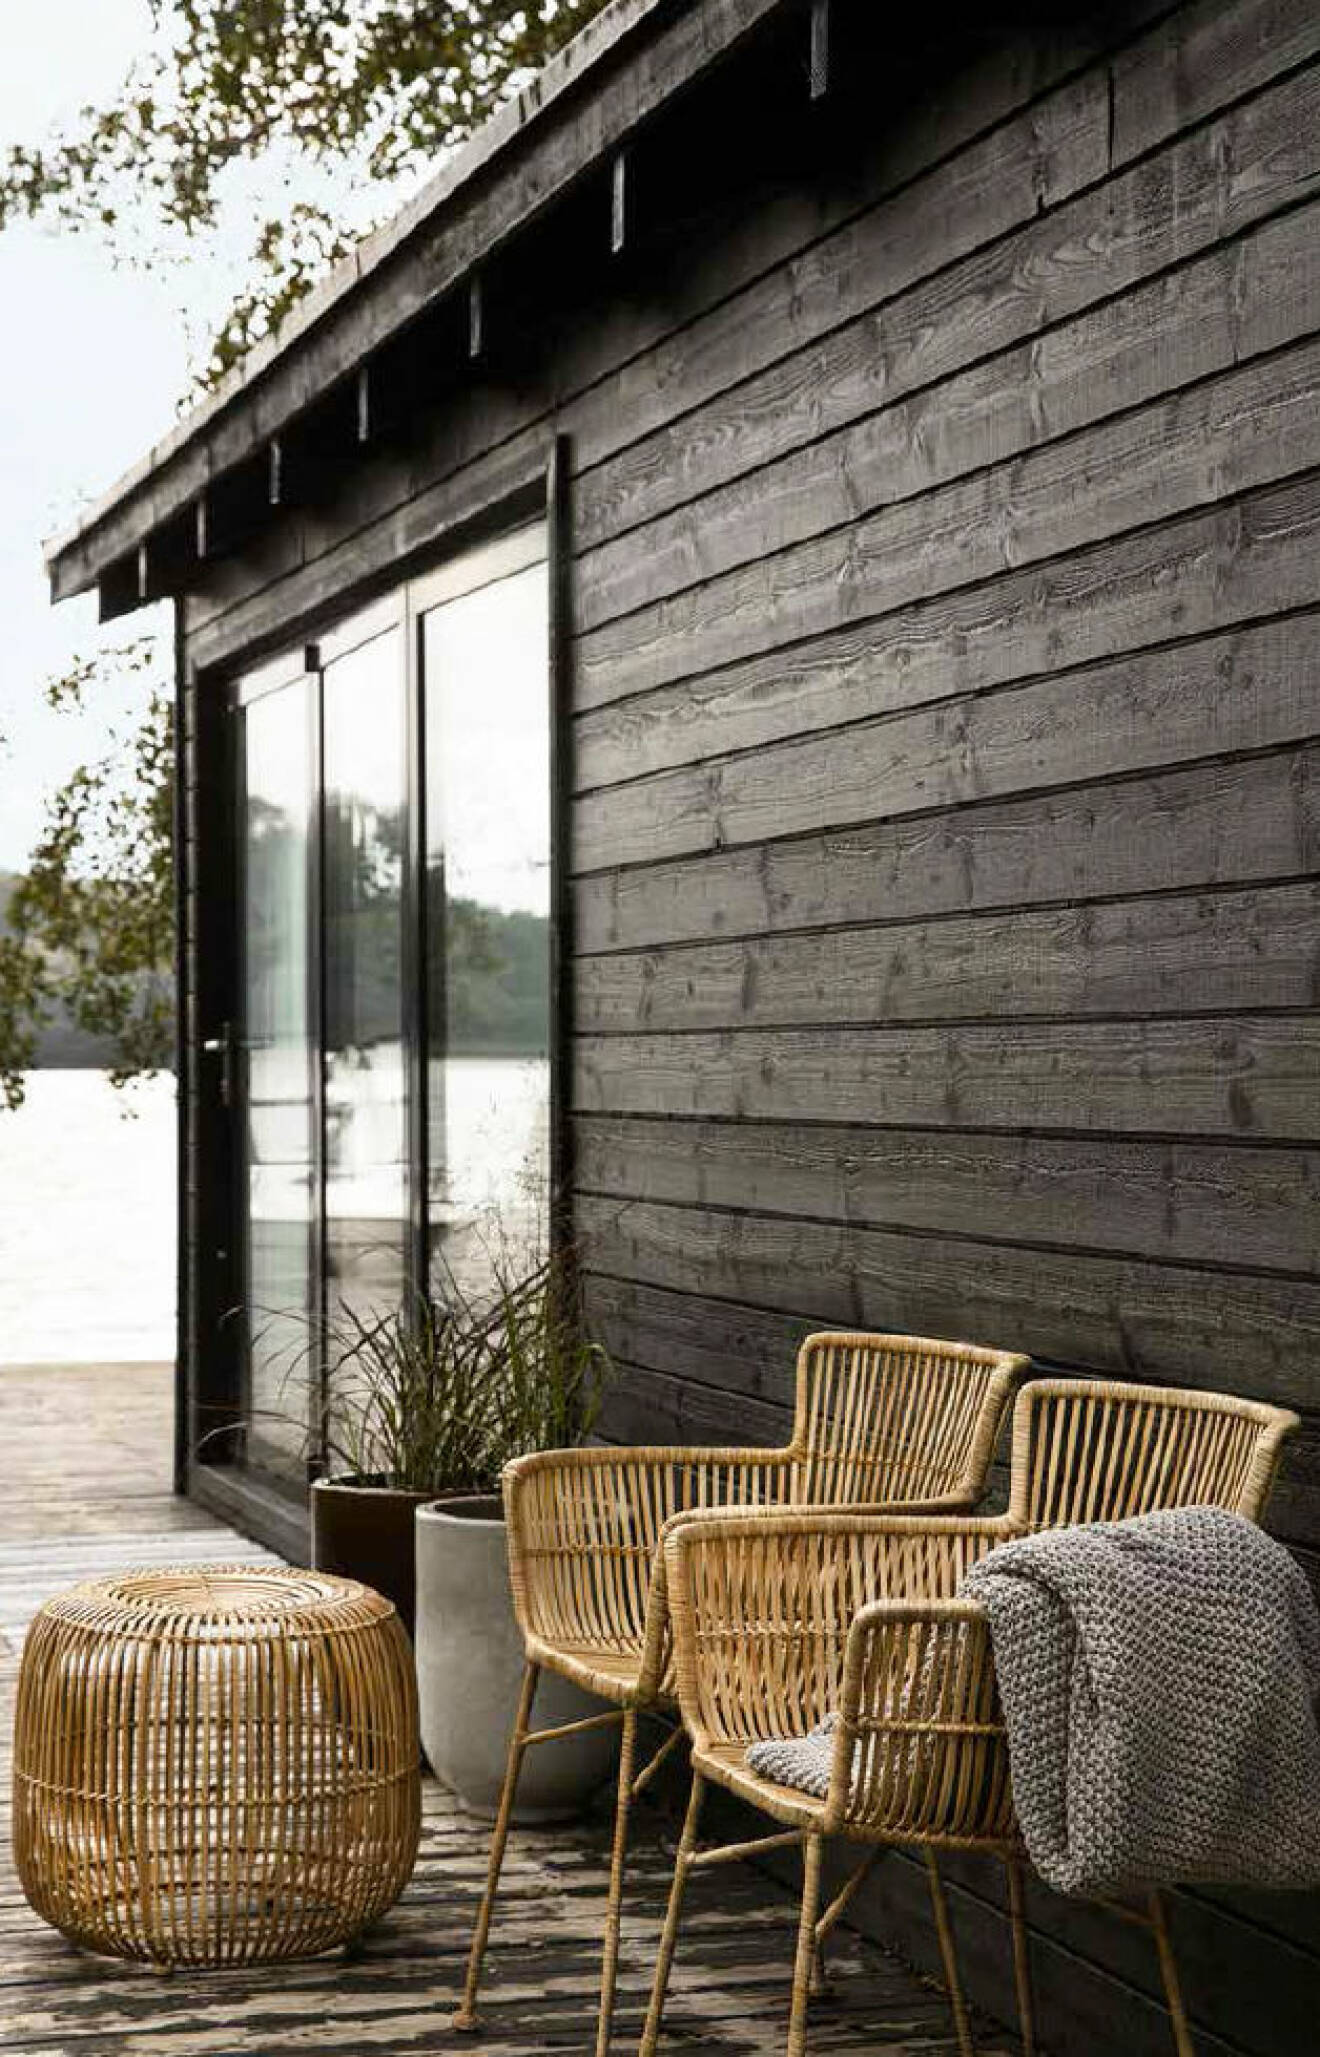 Rattan chairs and pouf for outdoor use.